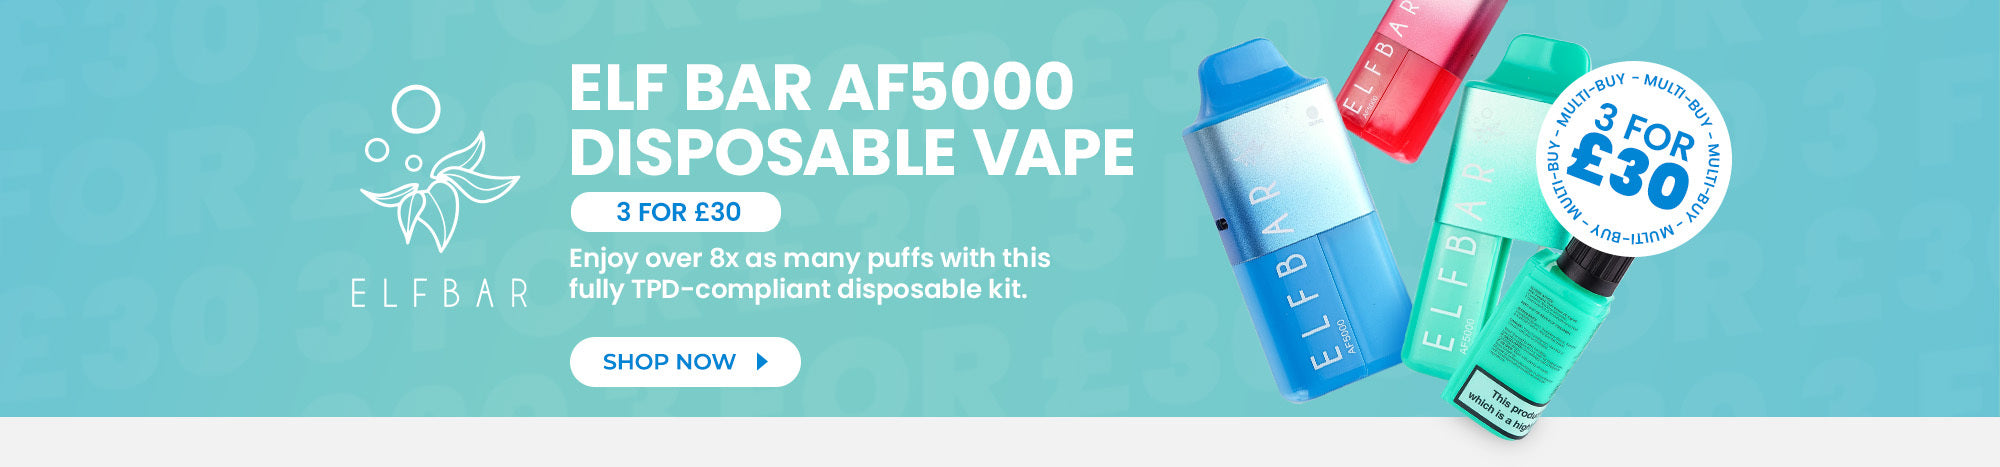 Discover the ELFBAR AF5000 Disposable Vape - Buy Any 3 for £30